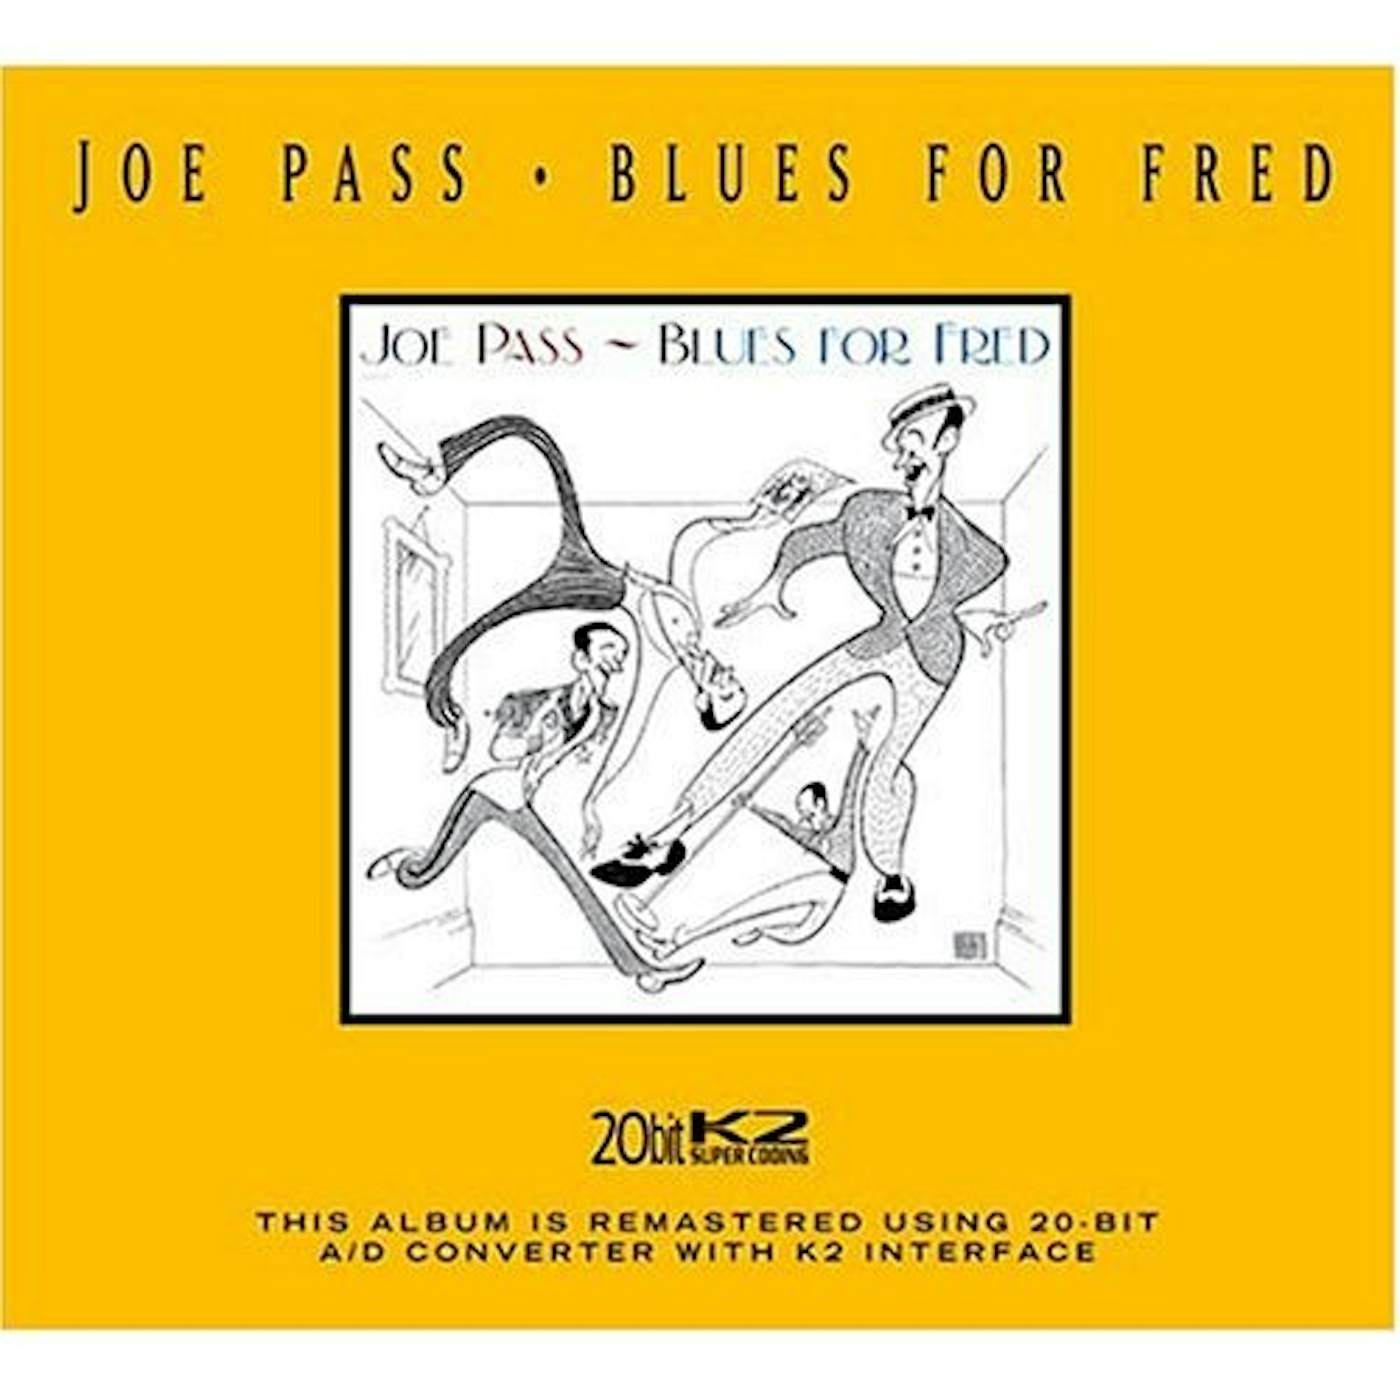 Joe Pass BLUES FOR FRED CD